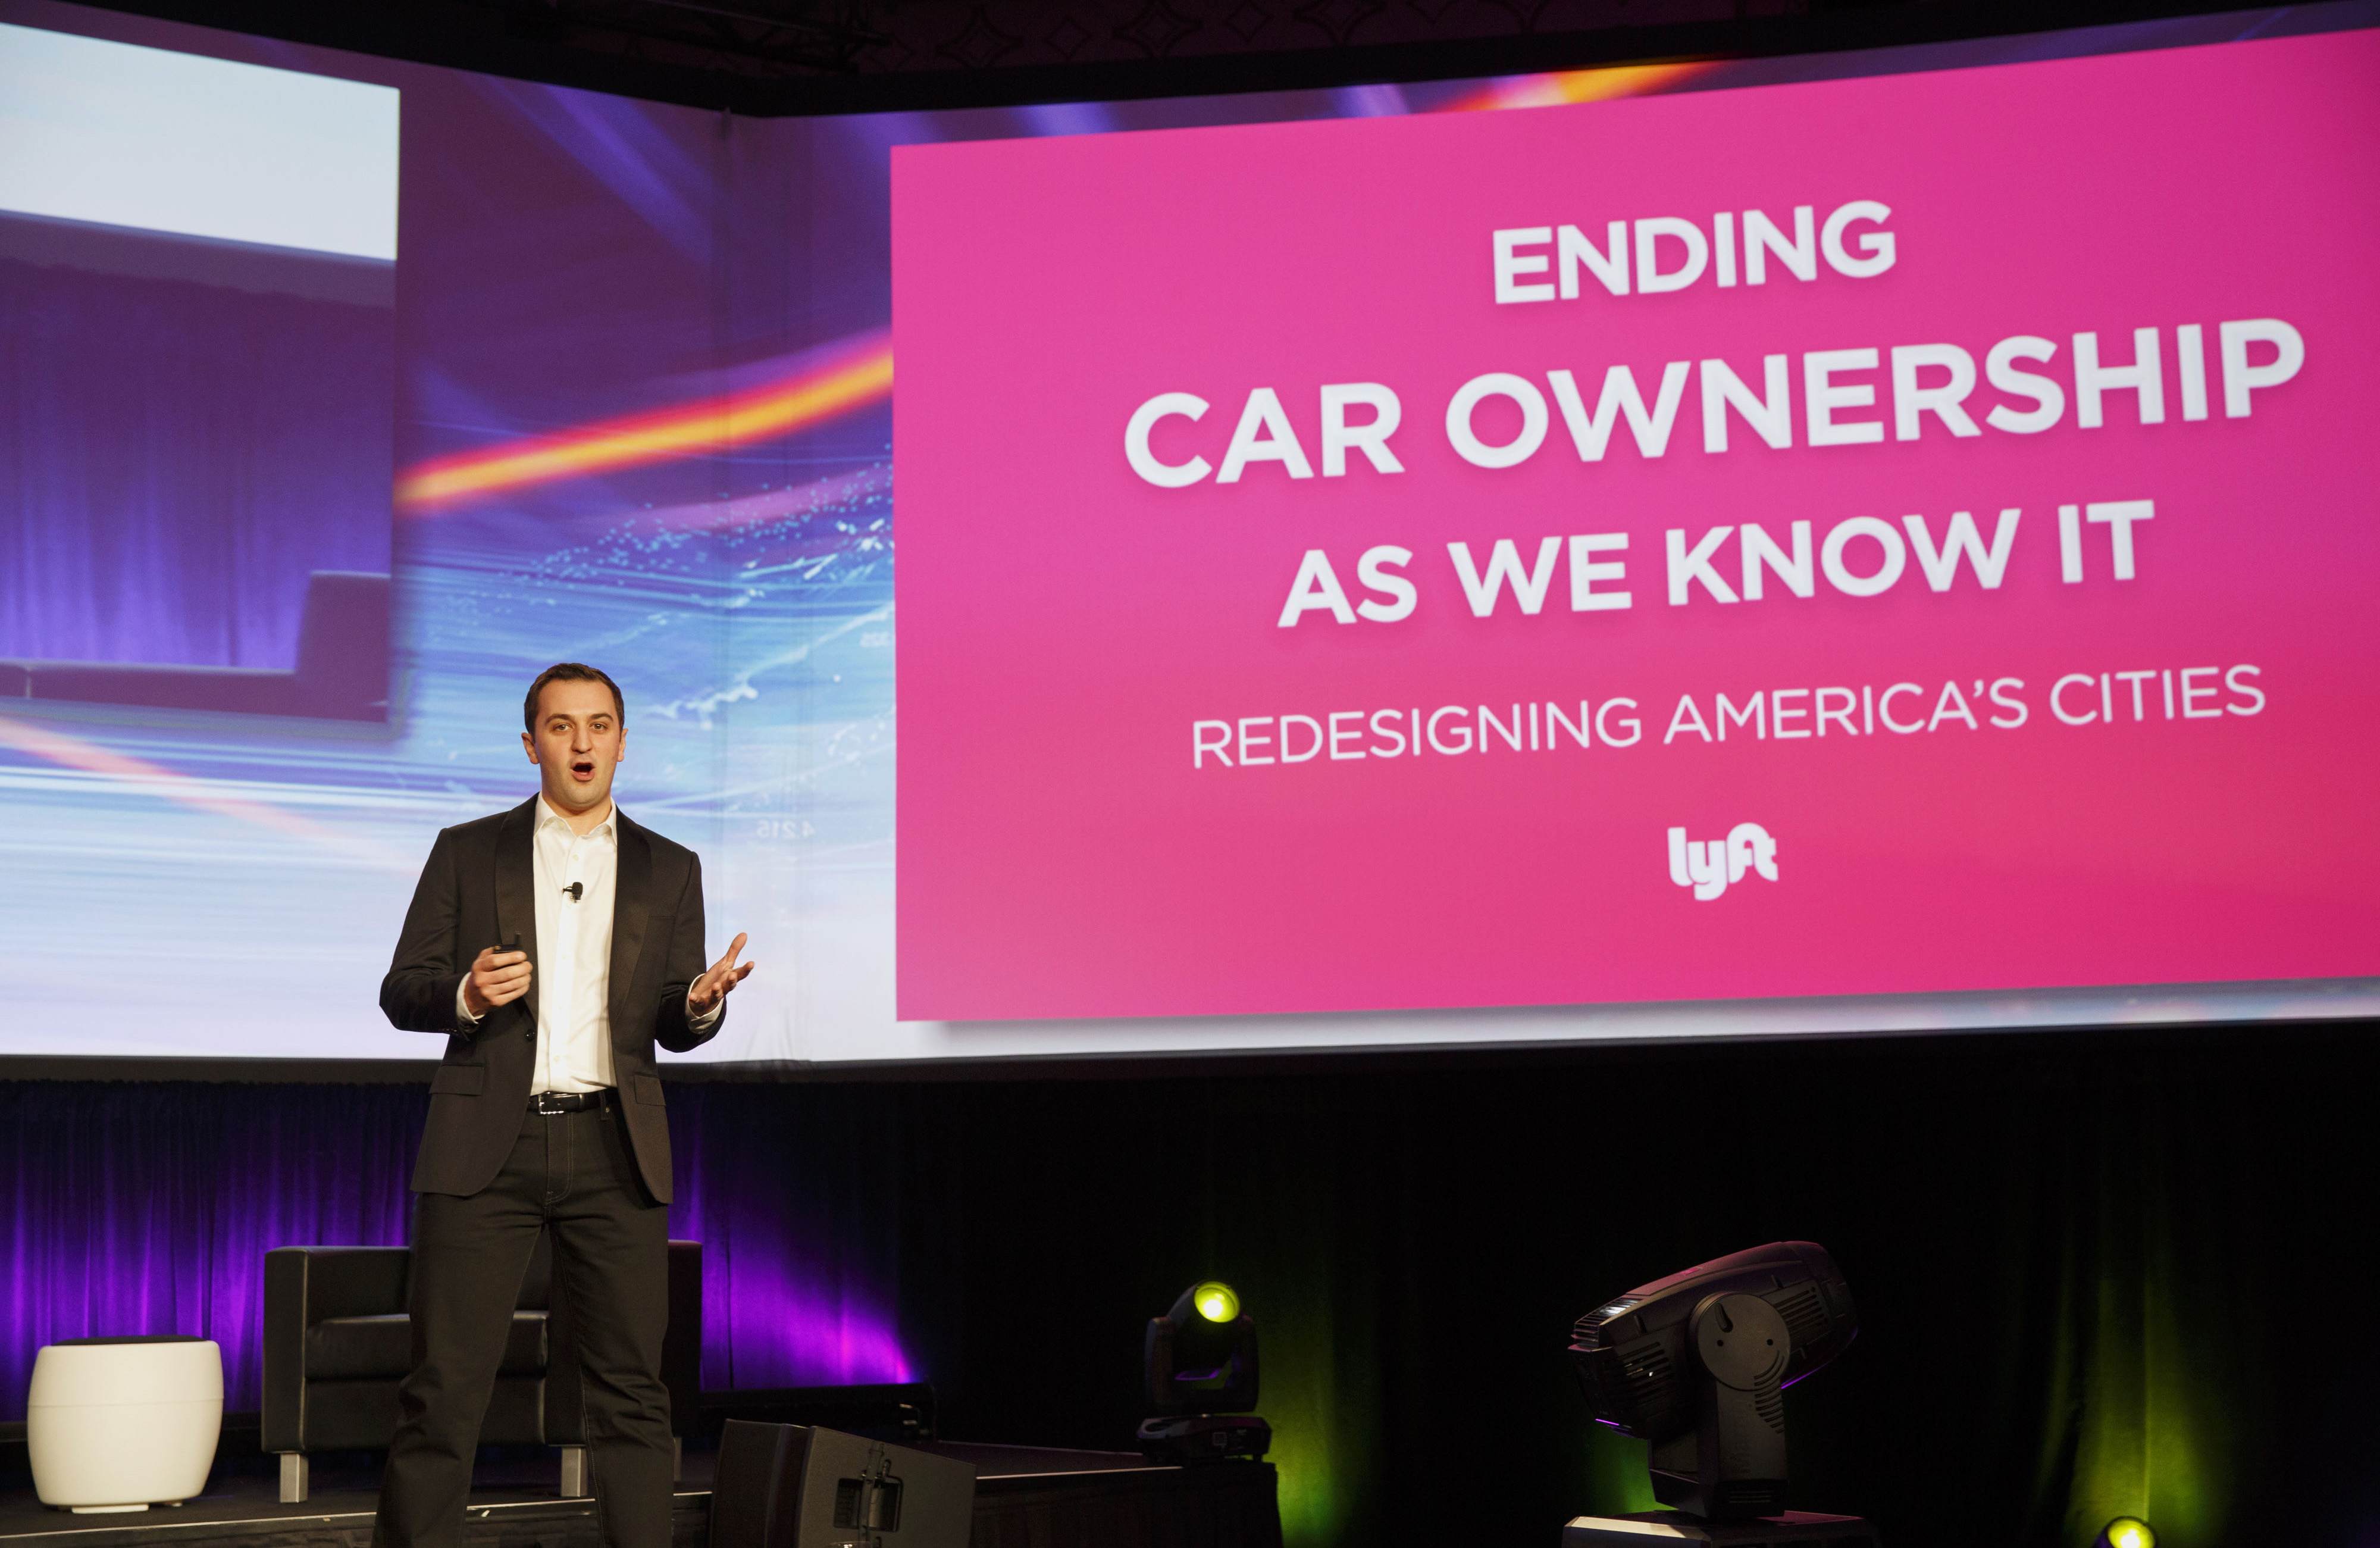 John Zimmer, co-founder and president of Lyft Inc., speaks during the Connected Car Expo ahead of the Los Angeles Auto Show in Los Angeles, California, U.S., on Tuesday, Nov. 17, 2015. (Bloomberg&mdash;Bloomberg via Getty Images)